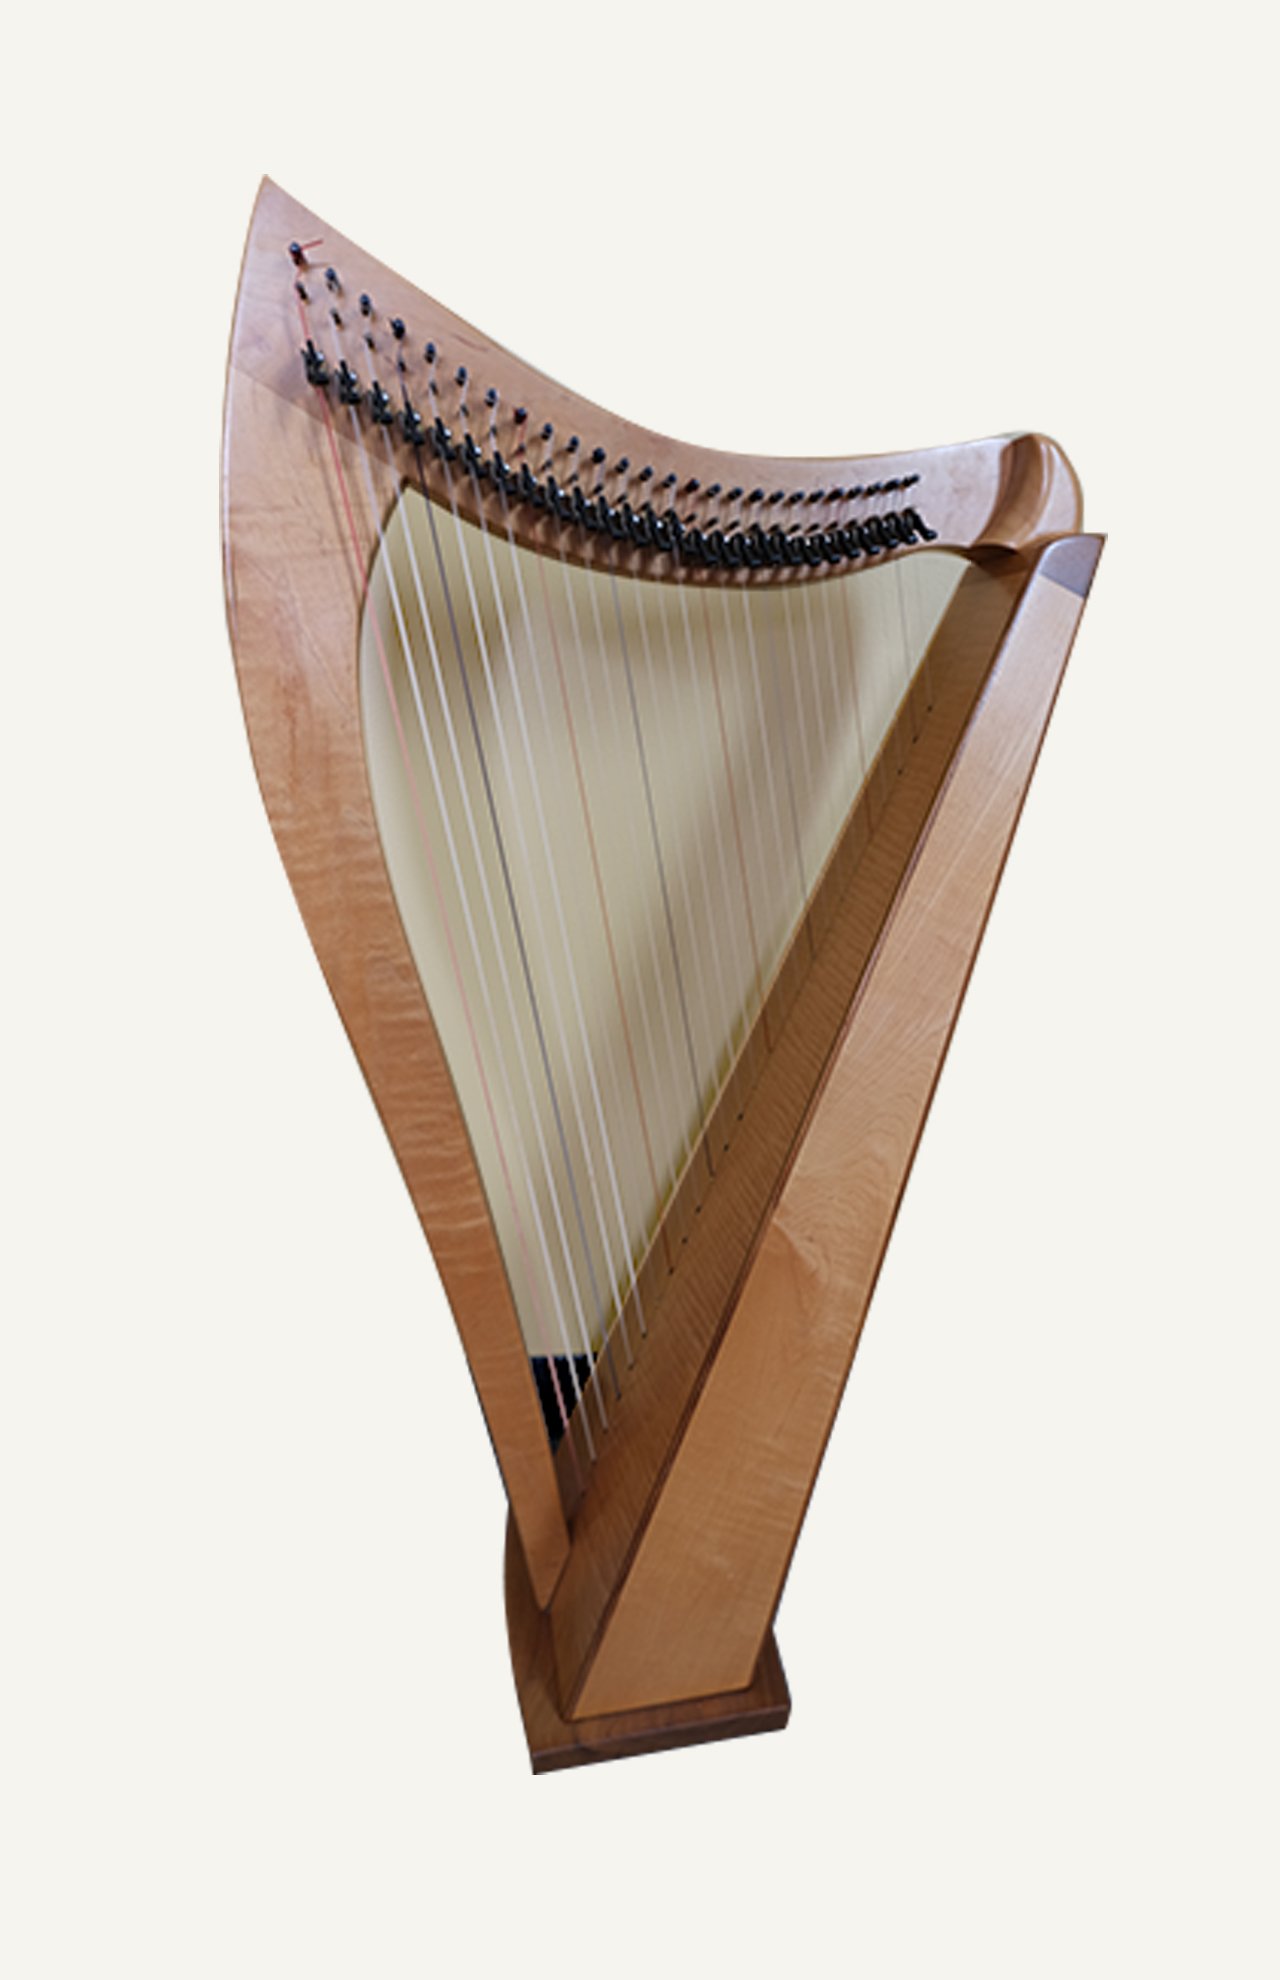 The throat/harp area on the Brother CS6000i is actually sm…